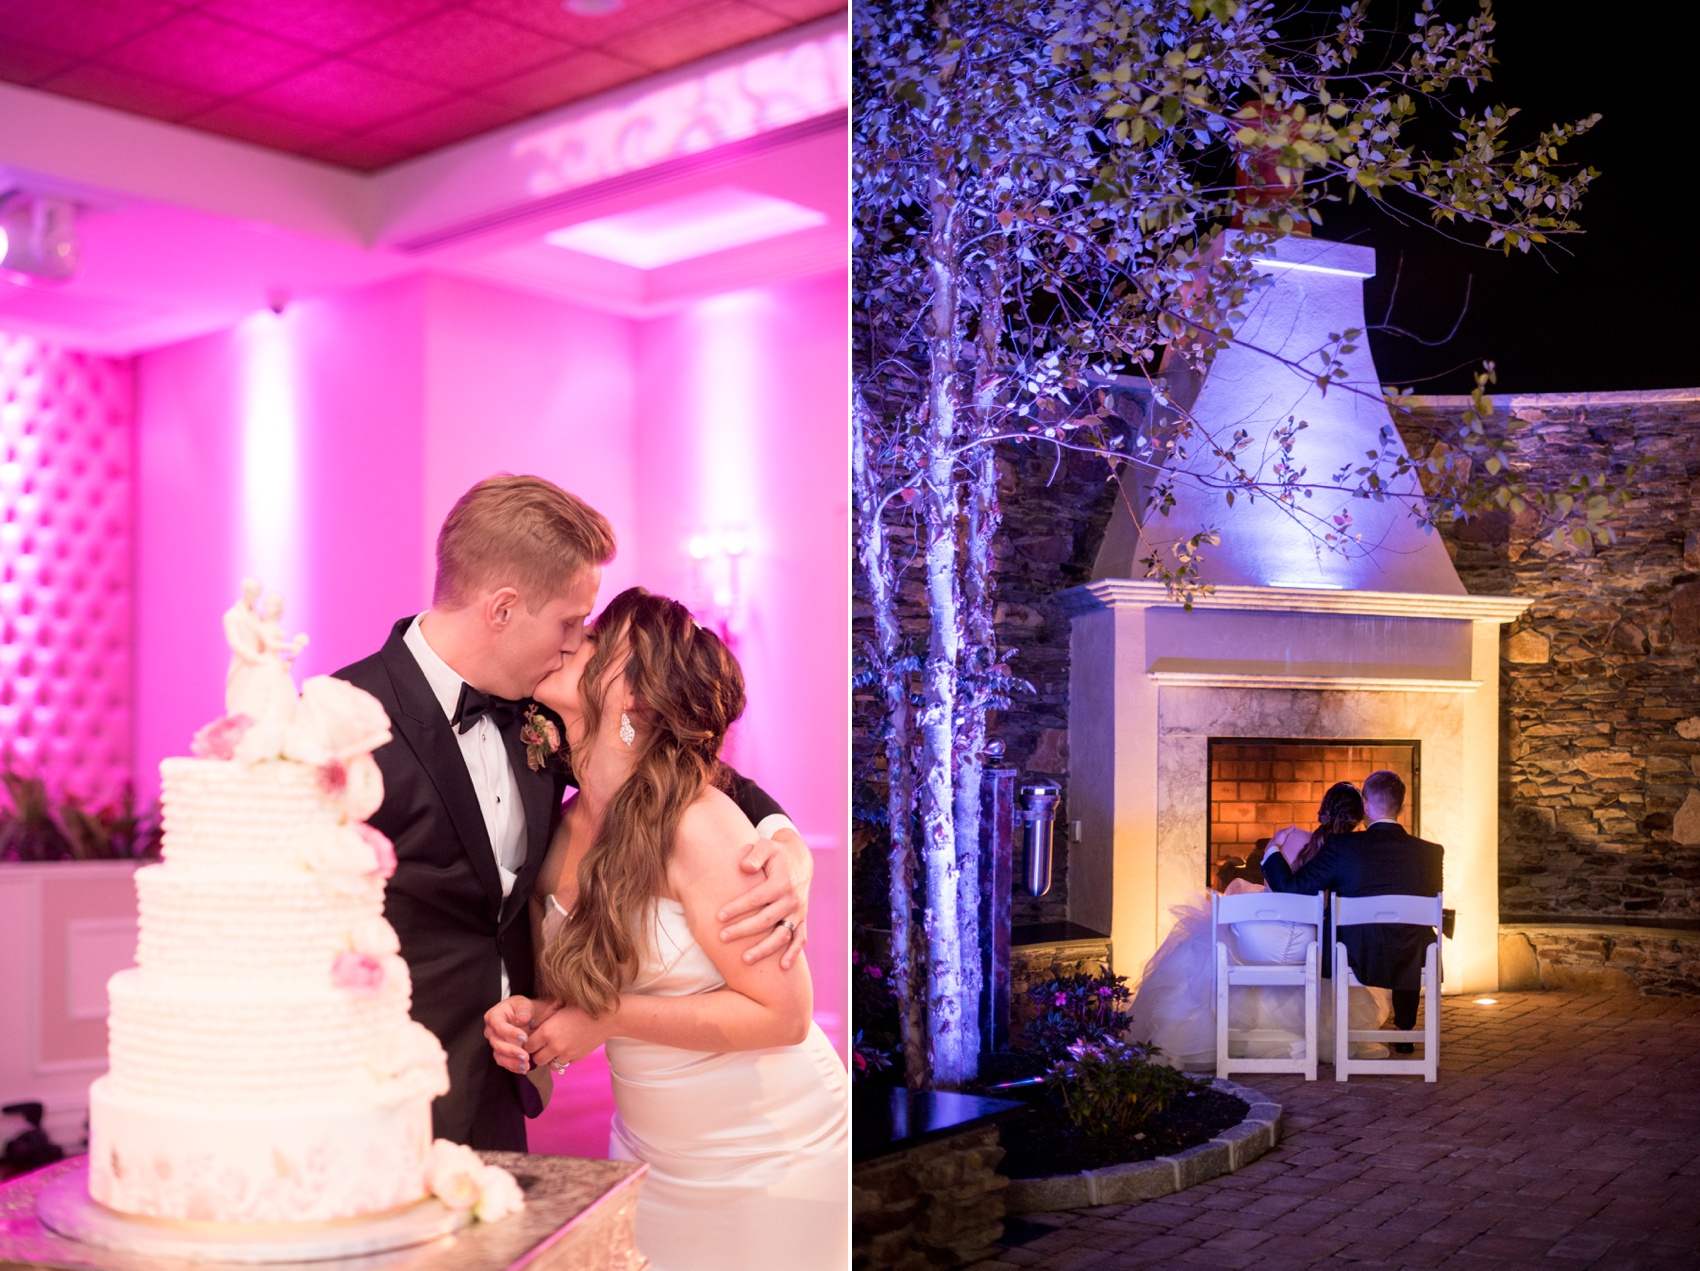 Cake cutting wedding photos by Mikkel Paige Photography, NYC wedding photographer. Planning by Dulce Dreams Events, flowers by Sachi Rose. Fox Hollow reception on Long Island with A White Cake dessert.